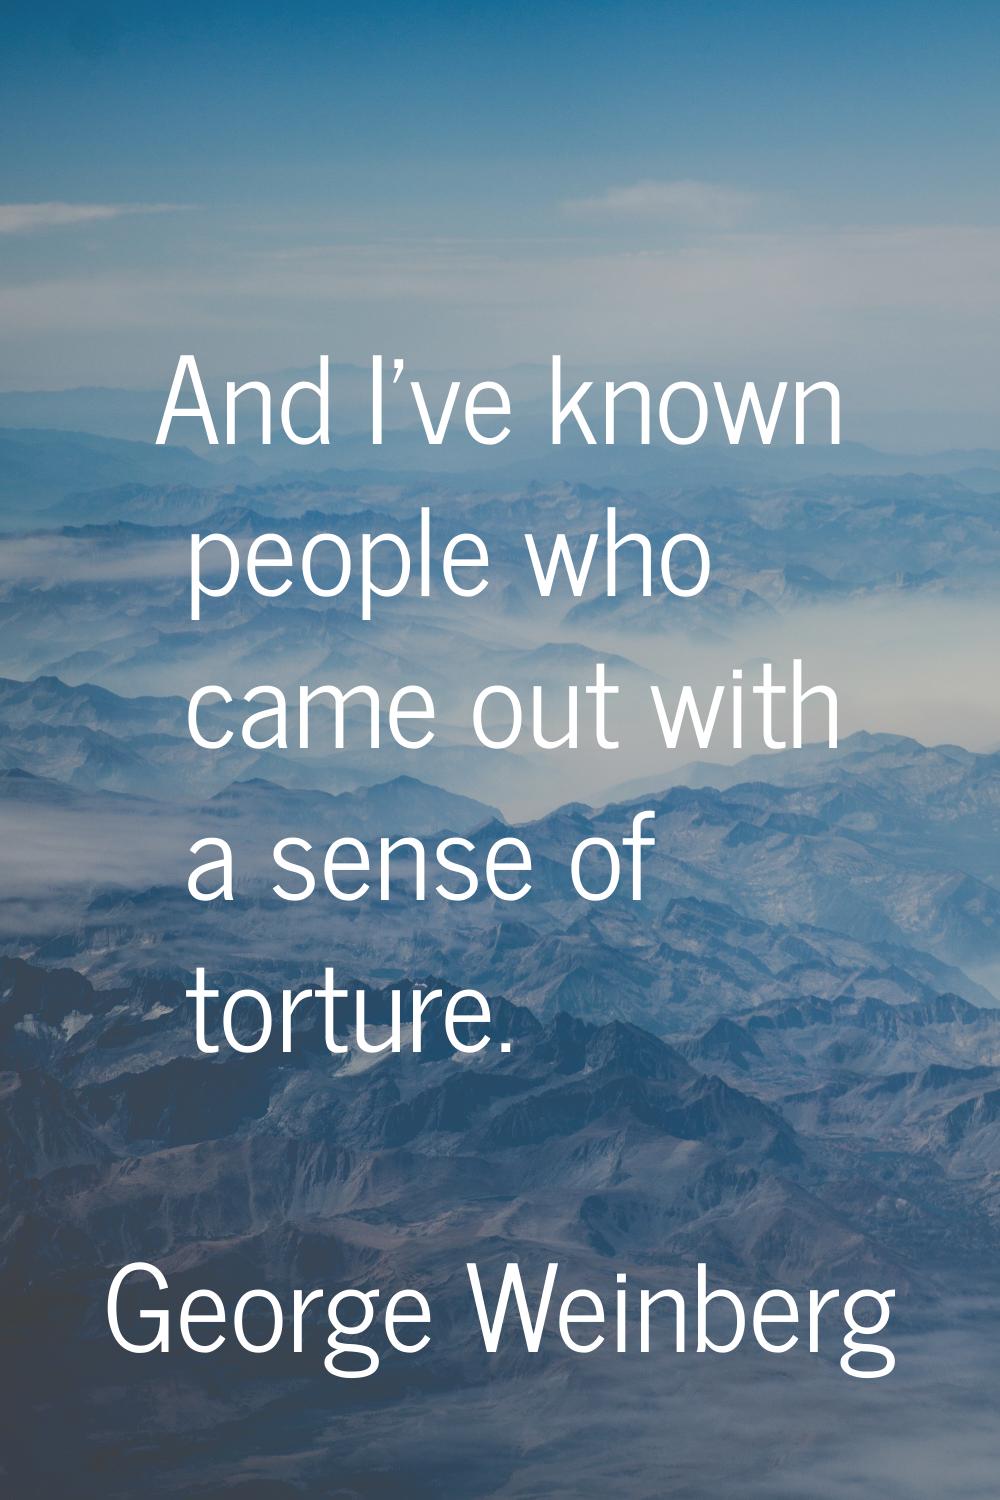 And I've known people who came out with a sense of torture.